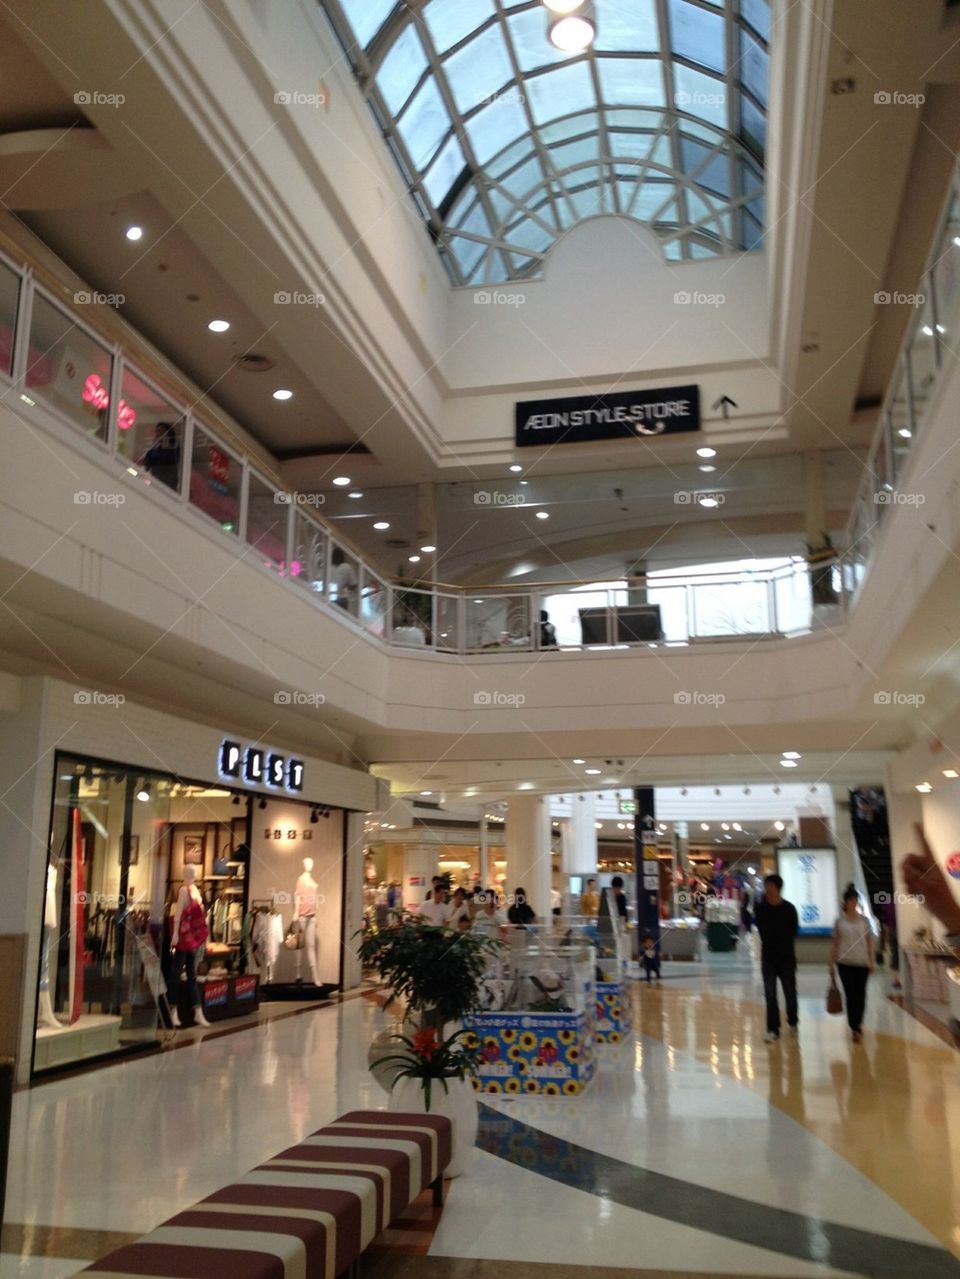 Main View of Aeon Mall